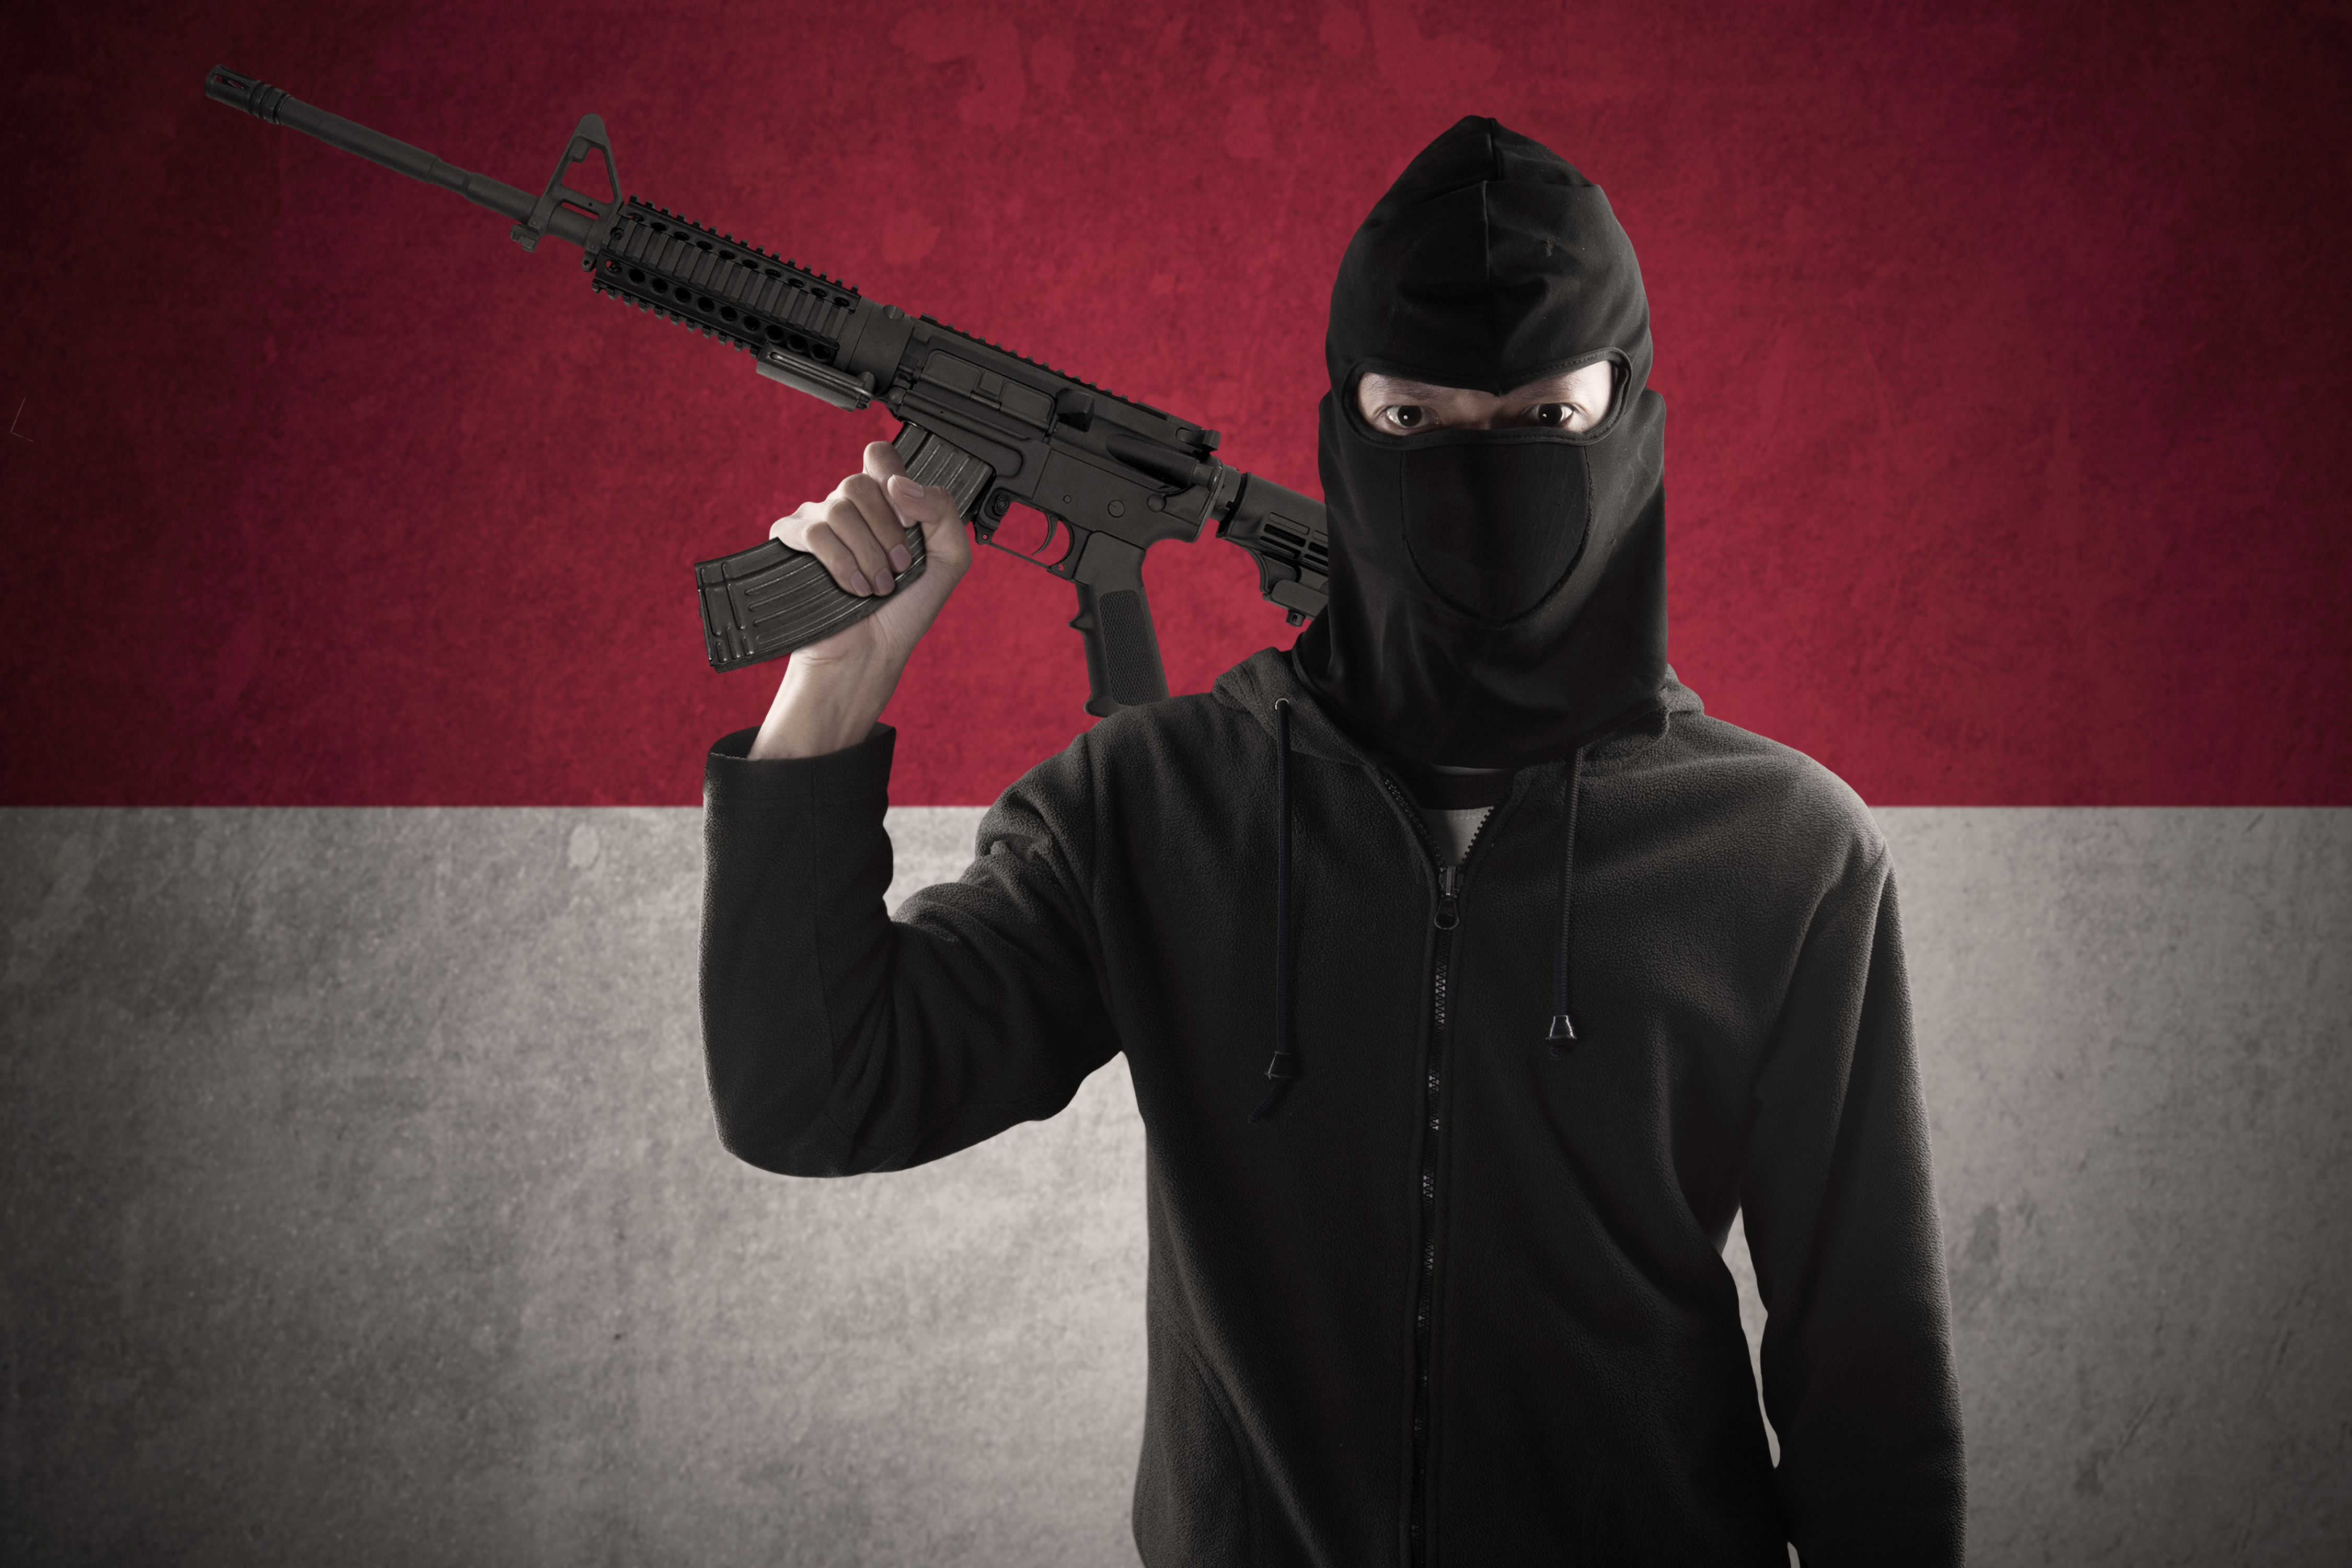 Beyond Performativity: Islamic State (ISIL) and Indonesia’s Counter-radicalization Challenge